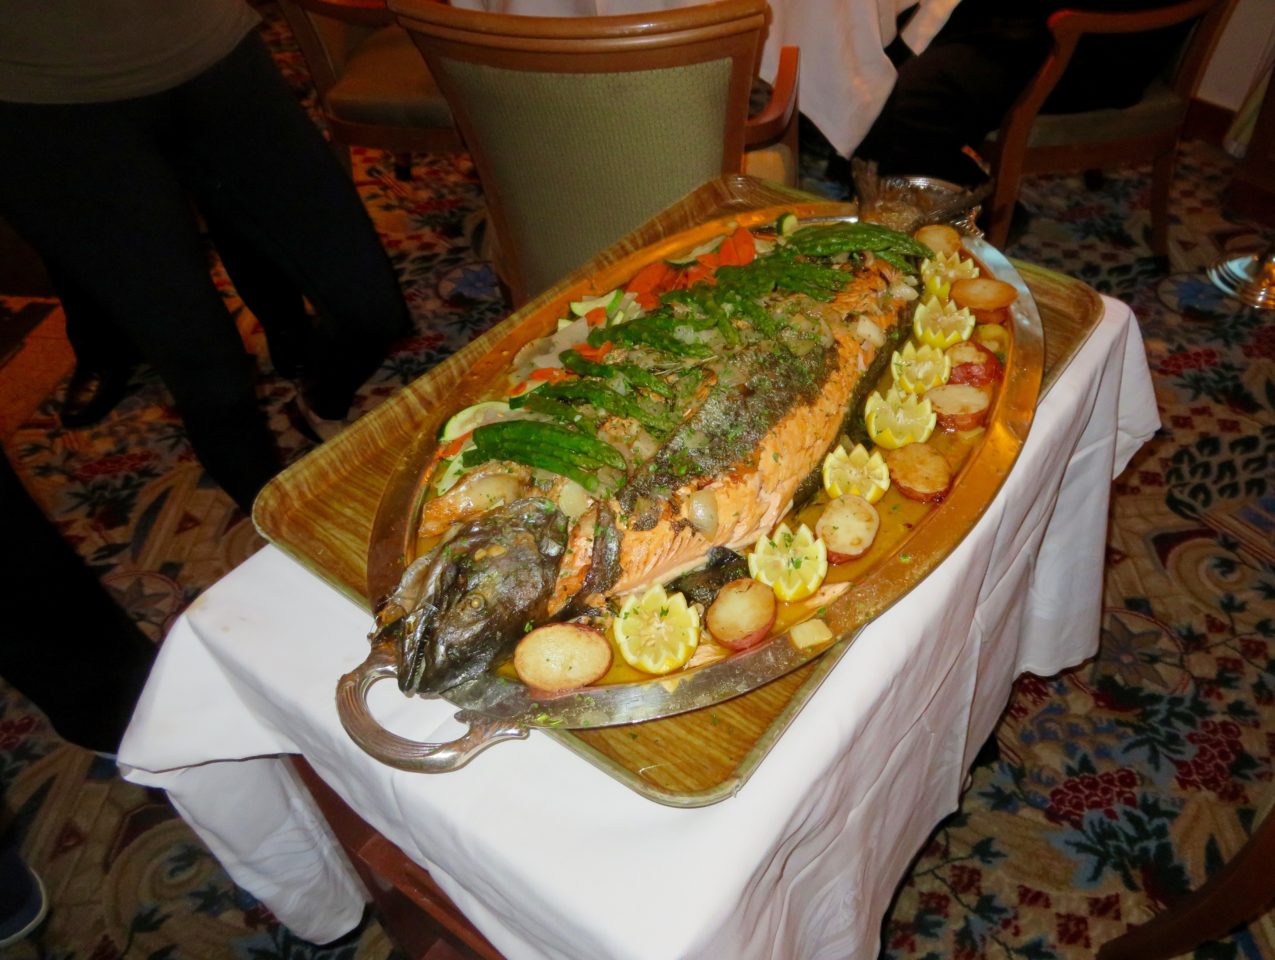 "Cook My Catch" salmon cooked and served onboard the Star Princess during our Alaska Cruise with Princess Cruises 